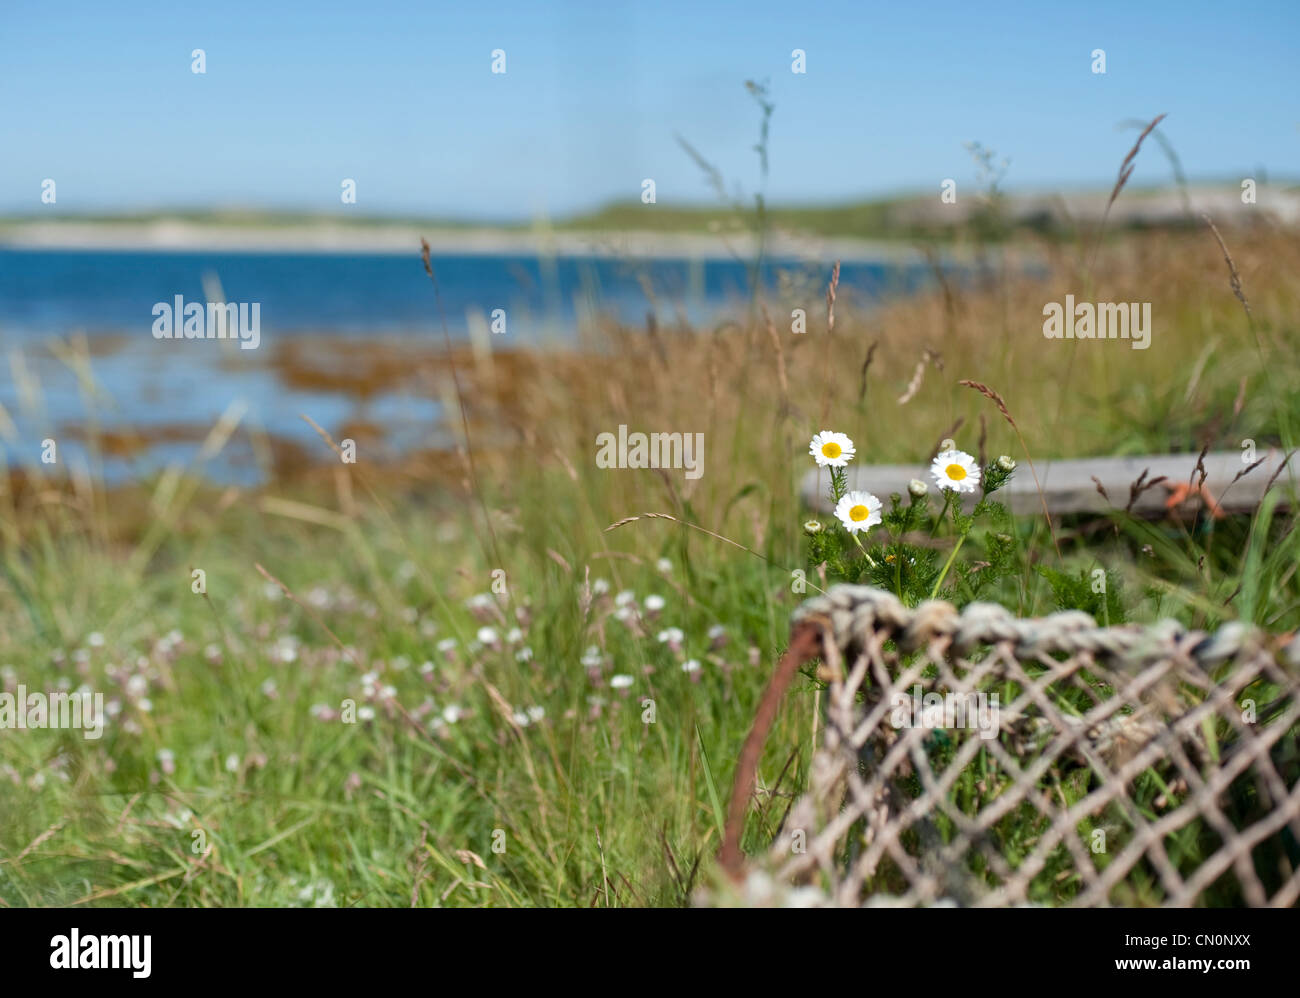 Daisies and the corner of a lobster net sit before a grassy beach on a sunny day in Scotland Stock Photo